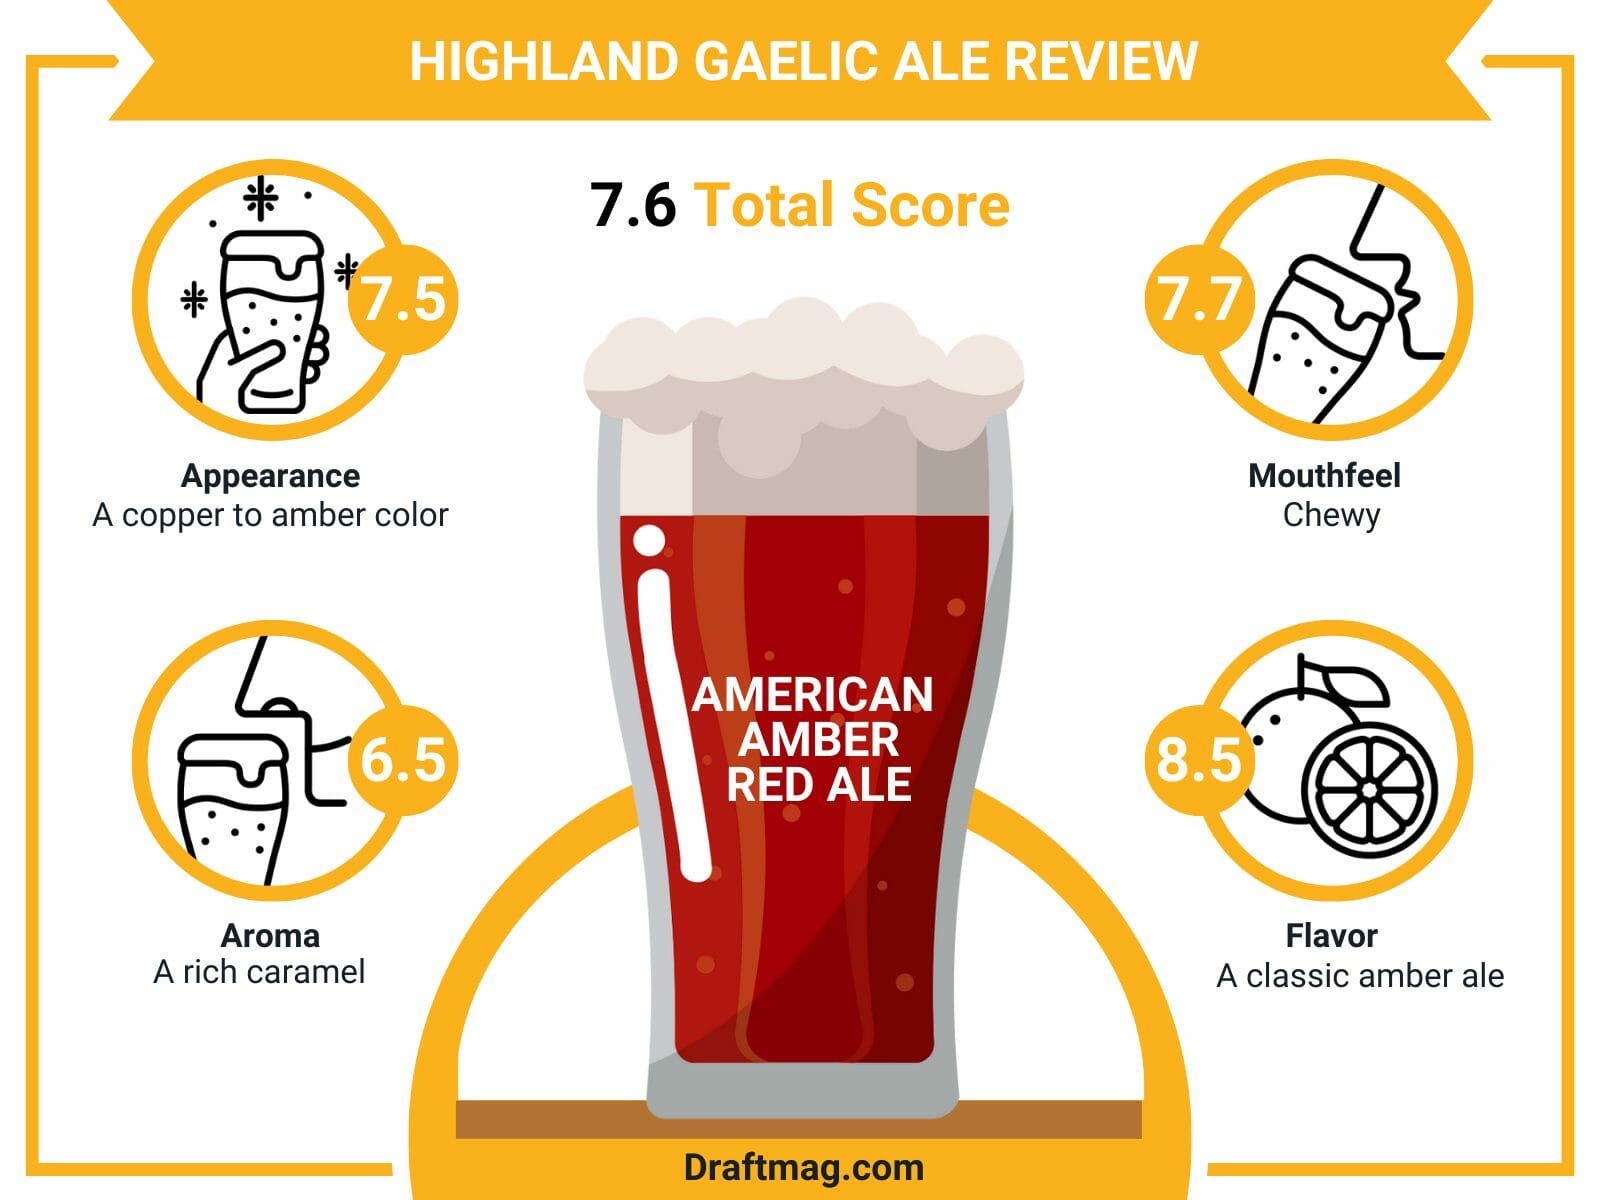 Highland gaelic ale review infographic